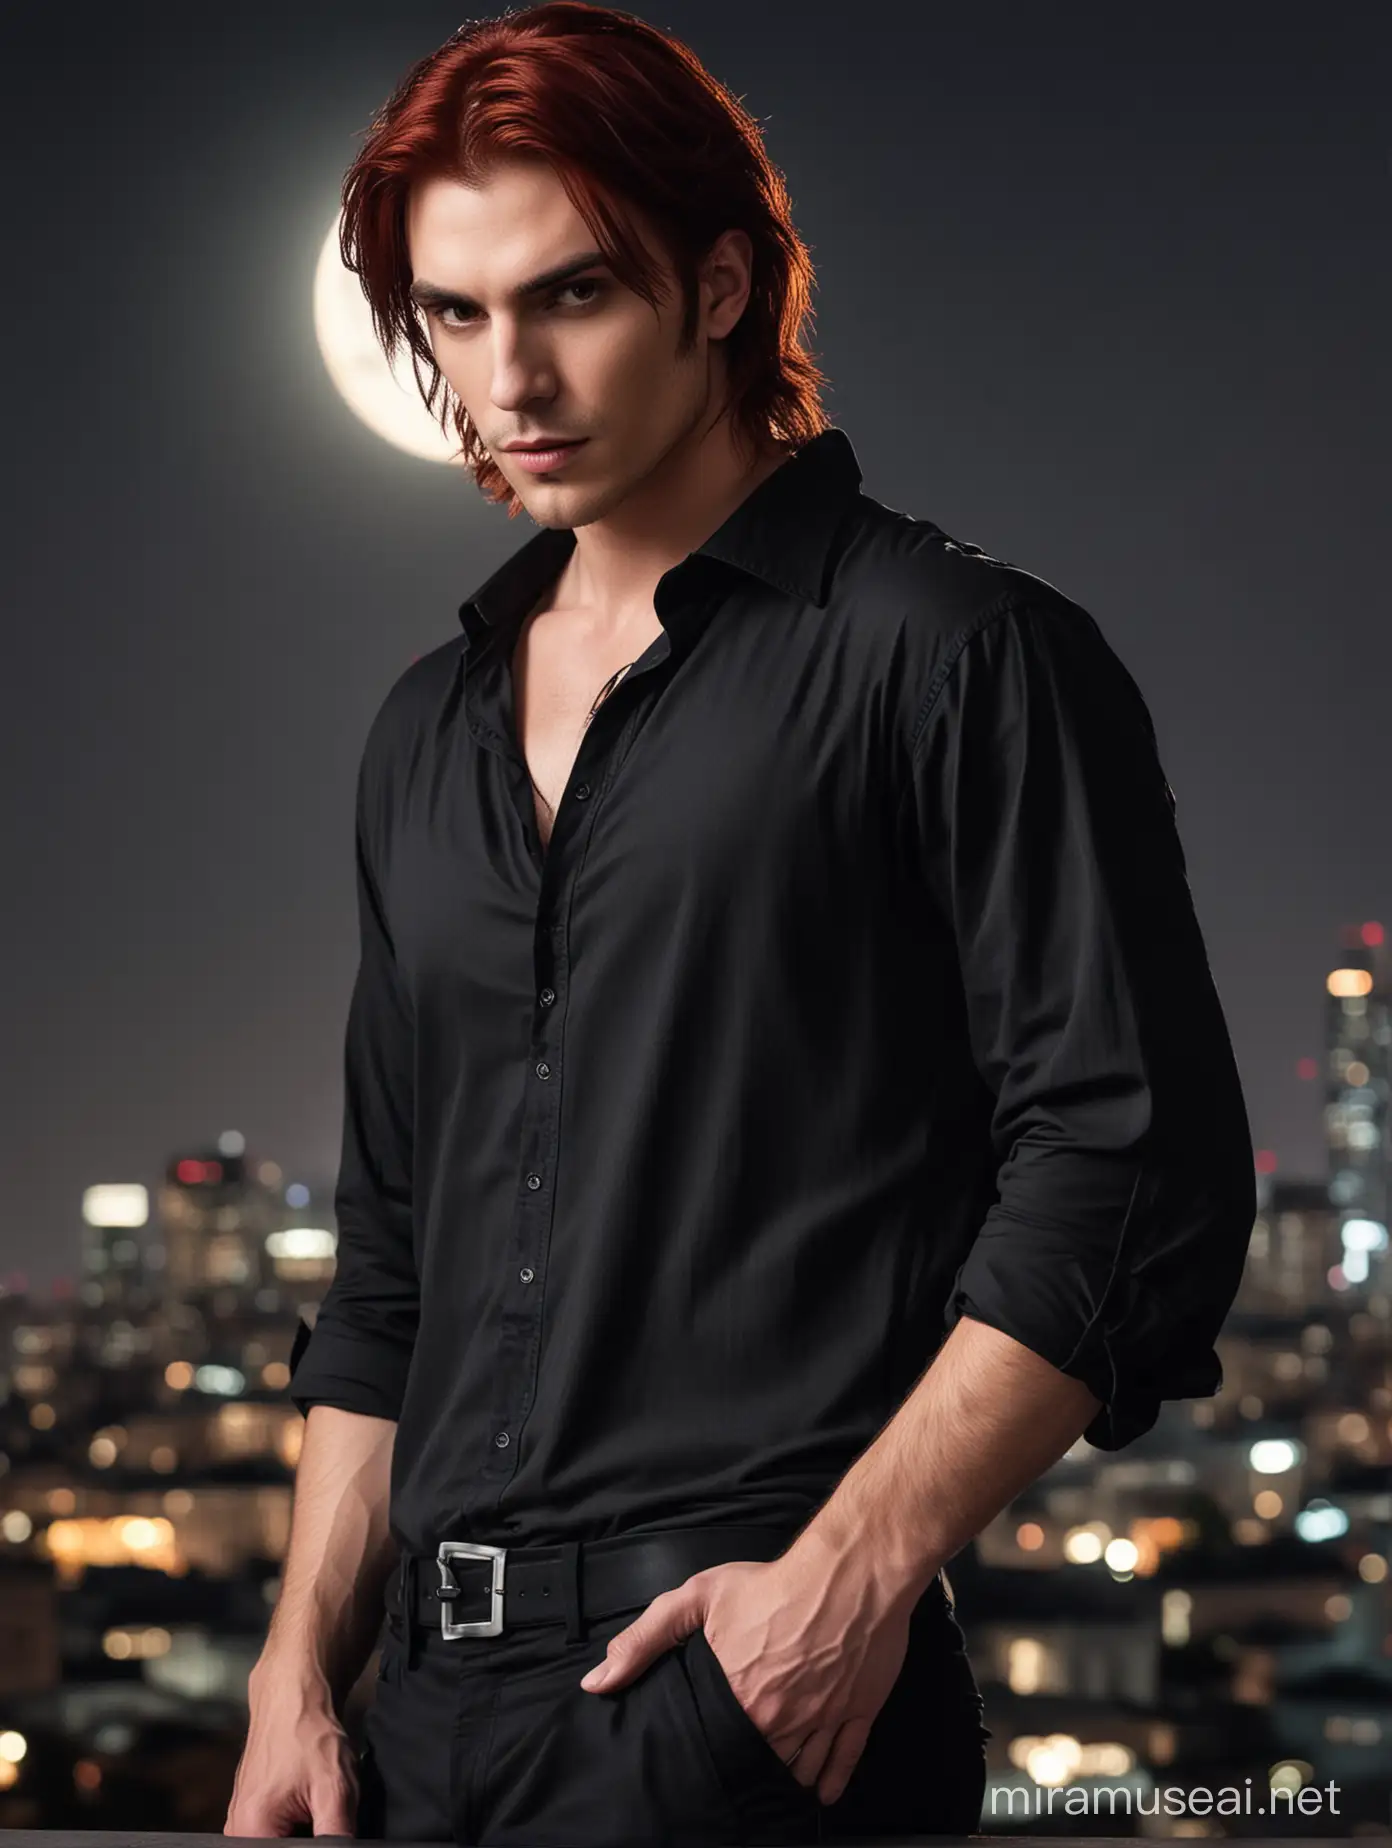 Intense Vampire Portrait with Red Moonlit Cityscape